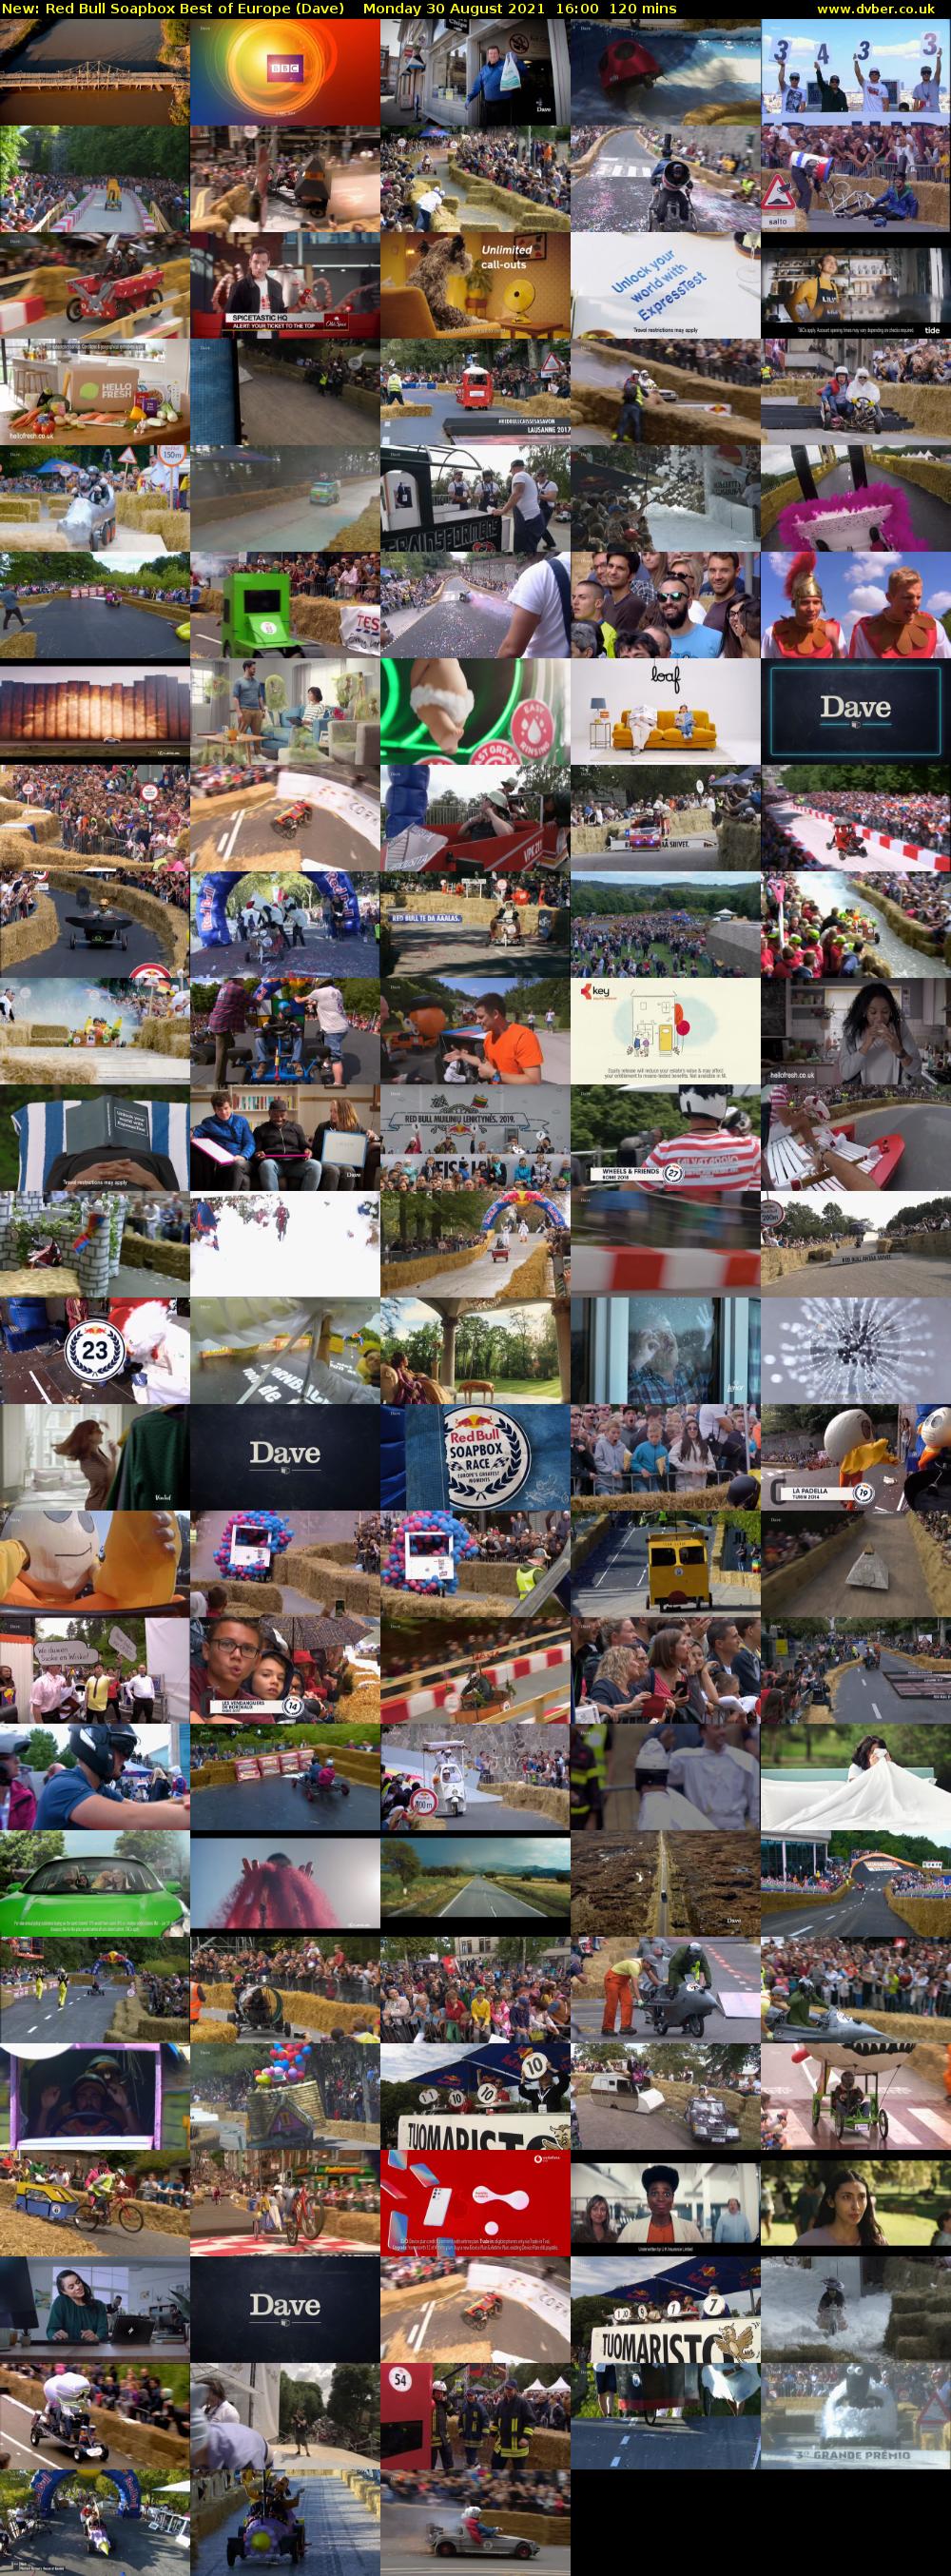 Red Bull Soapbox Best of Europe (Dave) Monday 30 August 2021 17:00 - 19:00